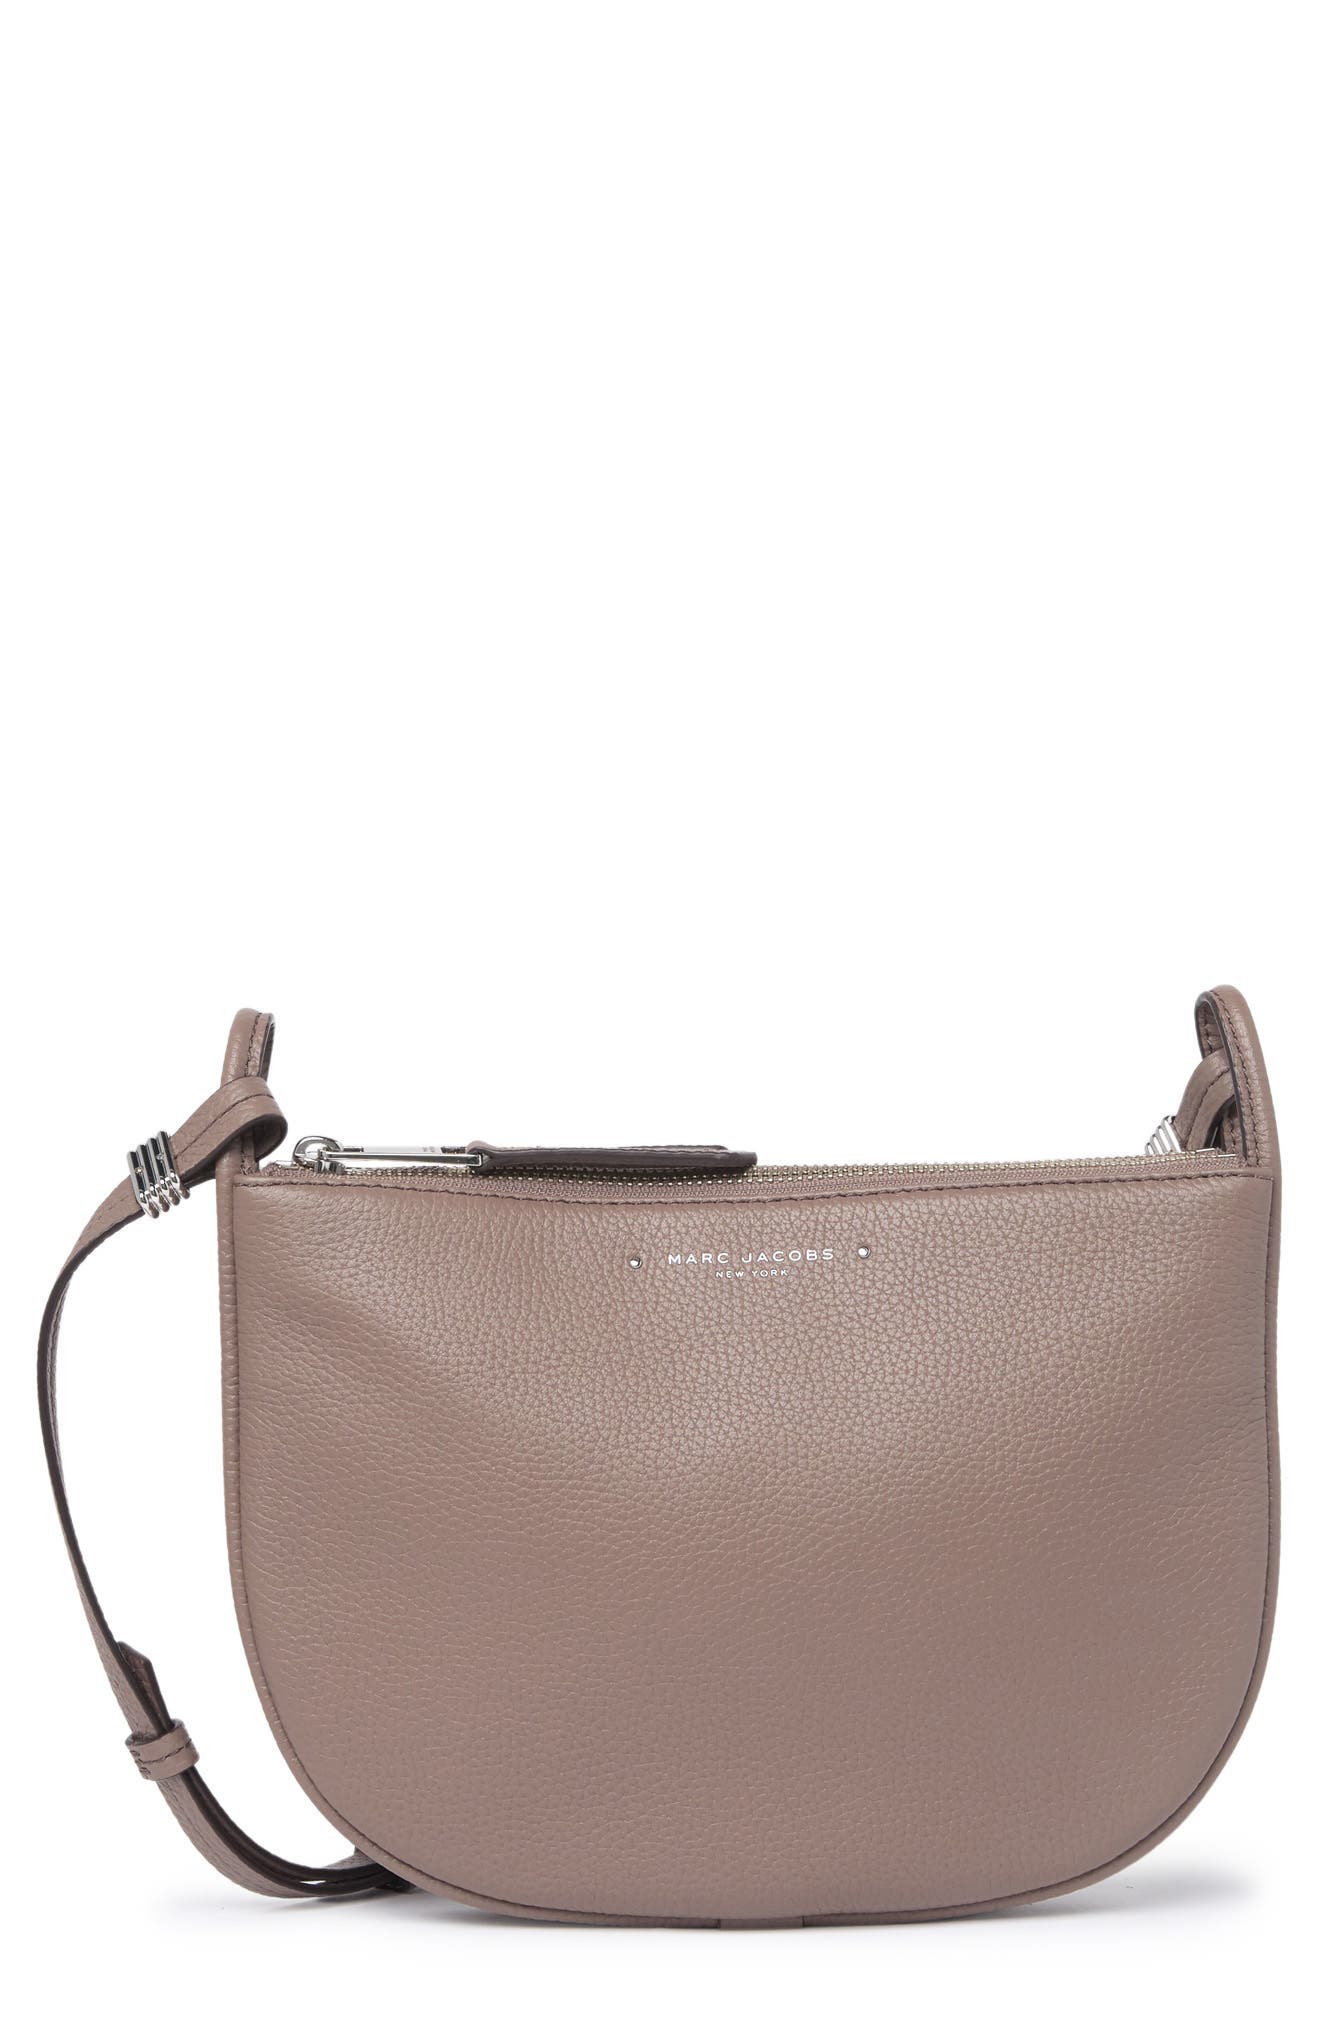 Marc Jacobs Supple Leather Crossbody Bag In Light Beige7